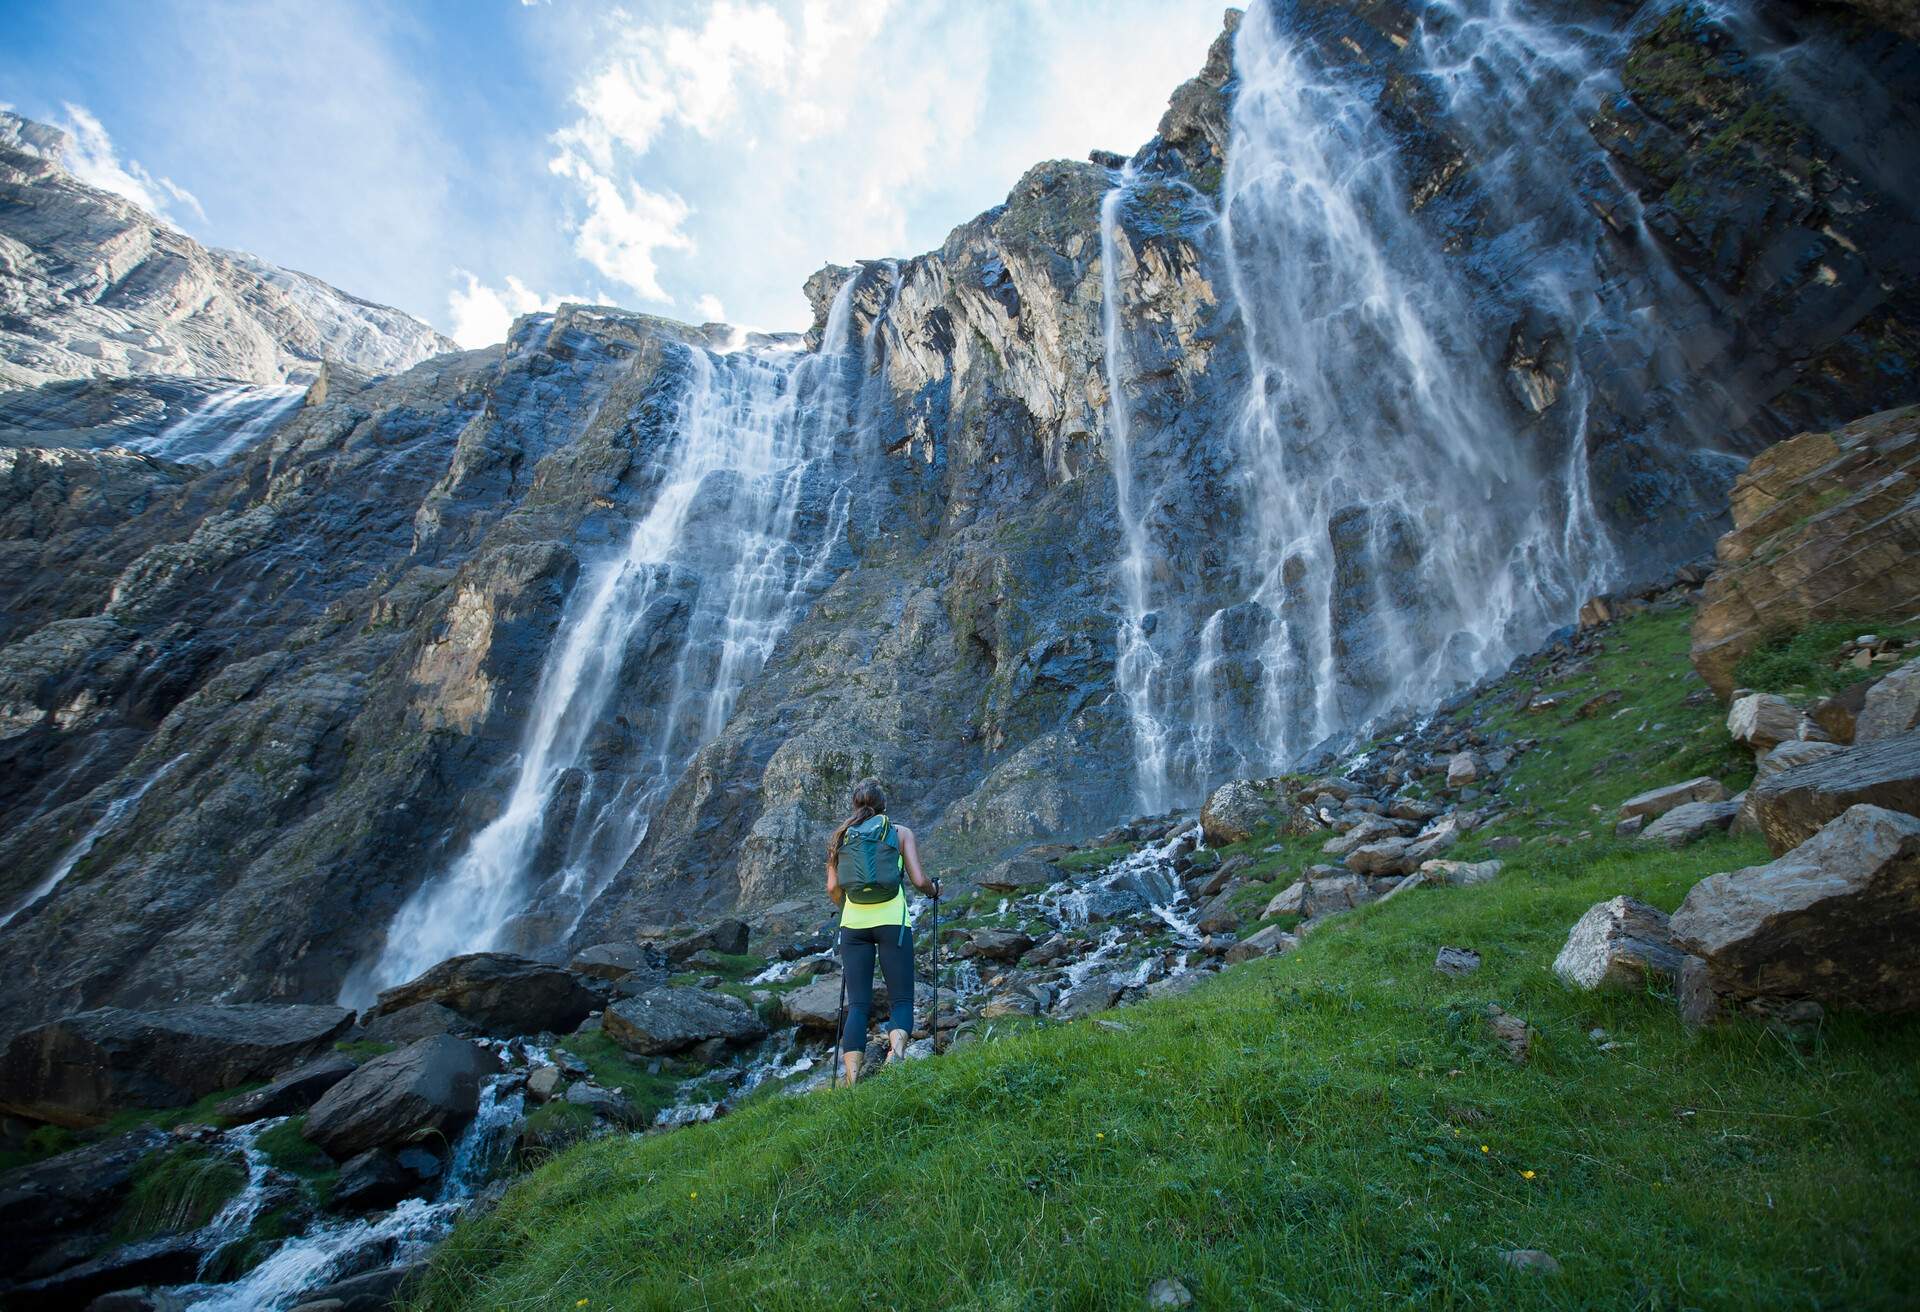 A woman holding hiking poles gazing up at the spectacular rush of a waterfall.